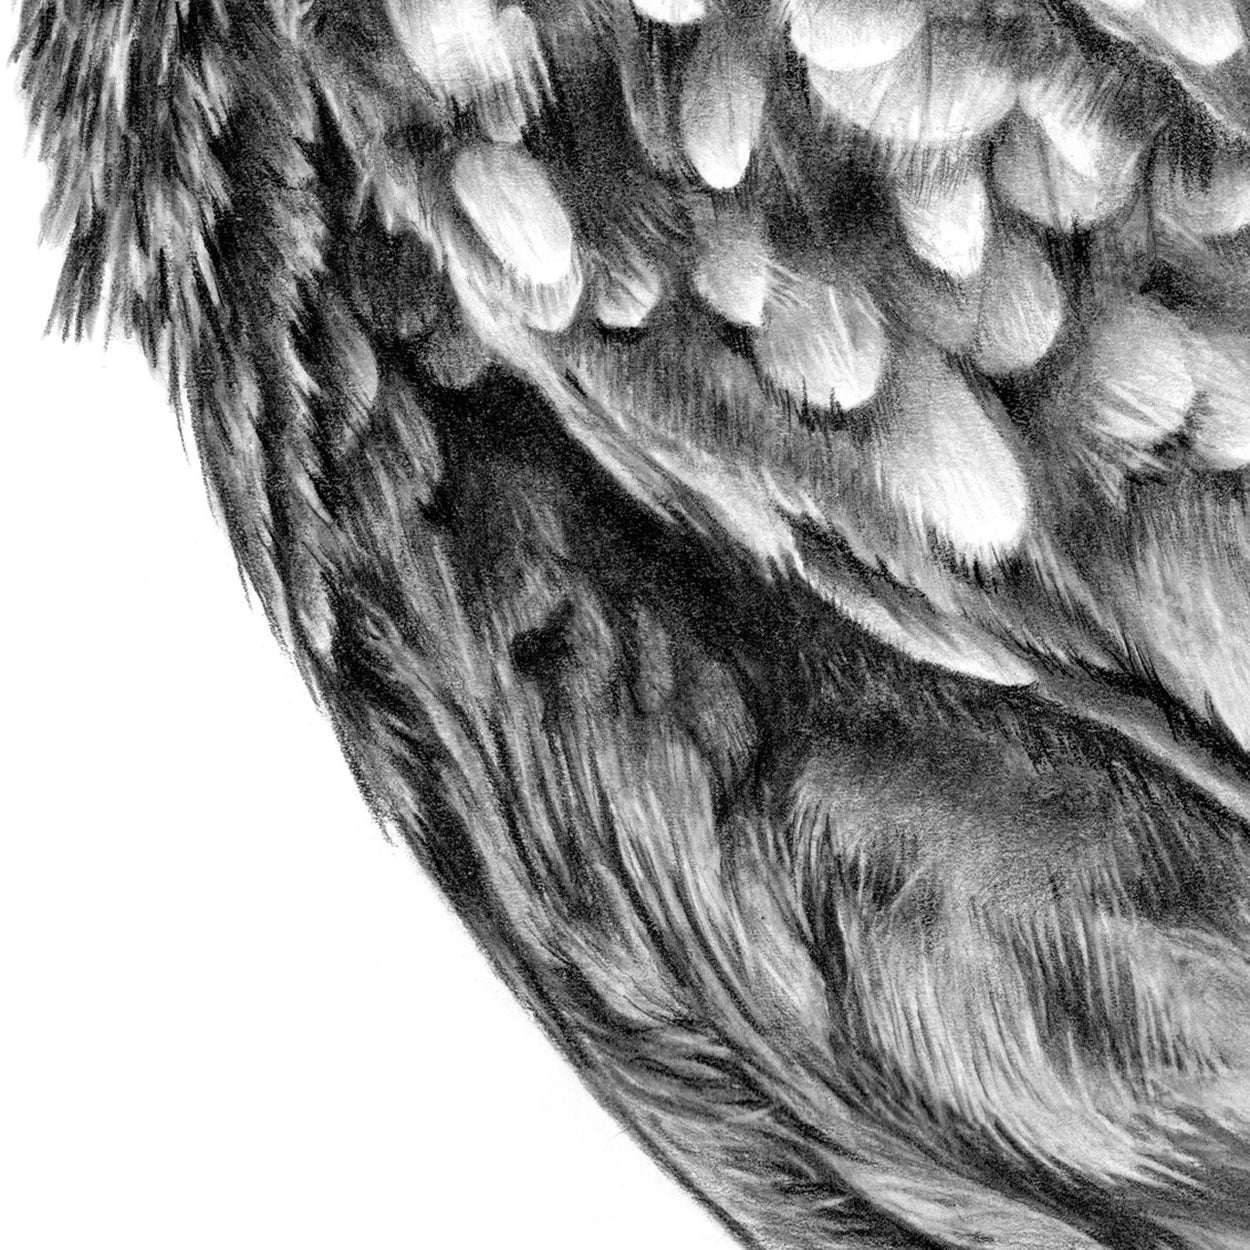 Little Owl Drawing Feathers Close-up - The Thriving Wild